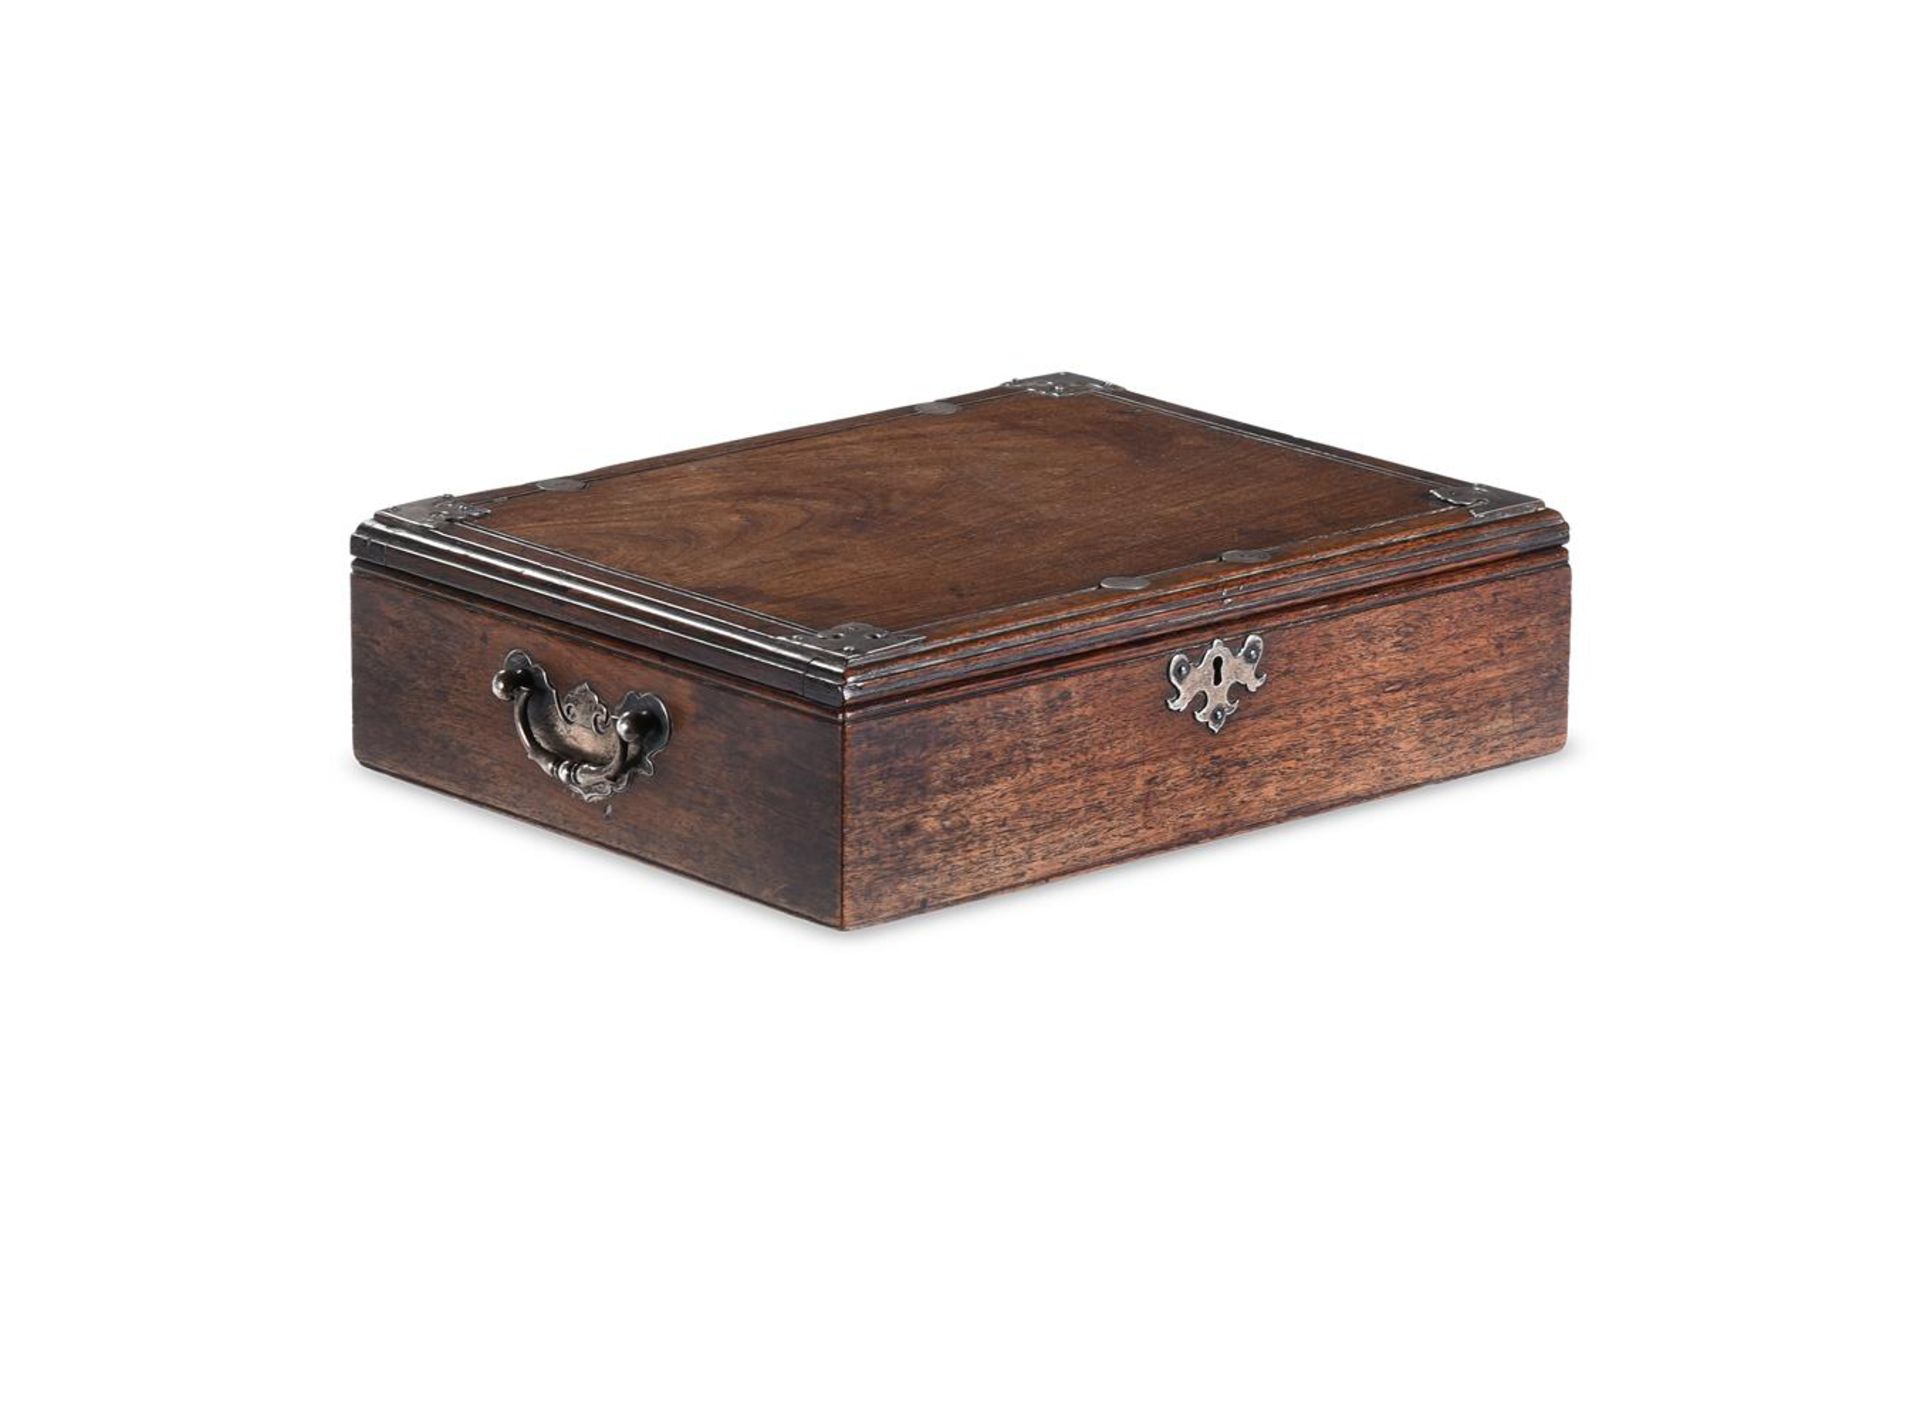 Y A CHINESE EXOTIC HARDWOOD AND PAKTONG MOUNTED DOCUMENT BOX, 18TH CENTURY